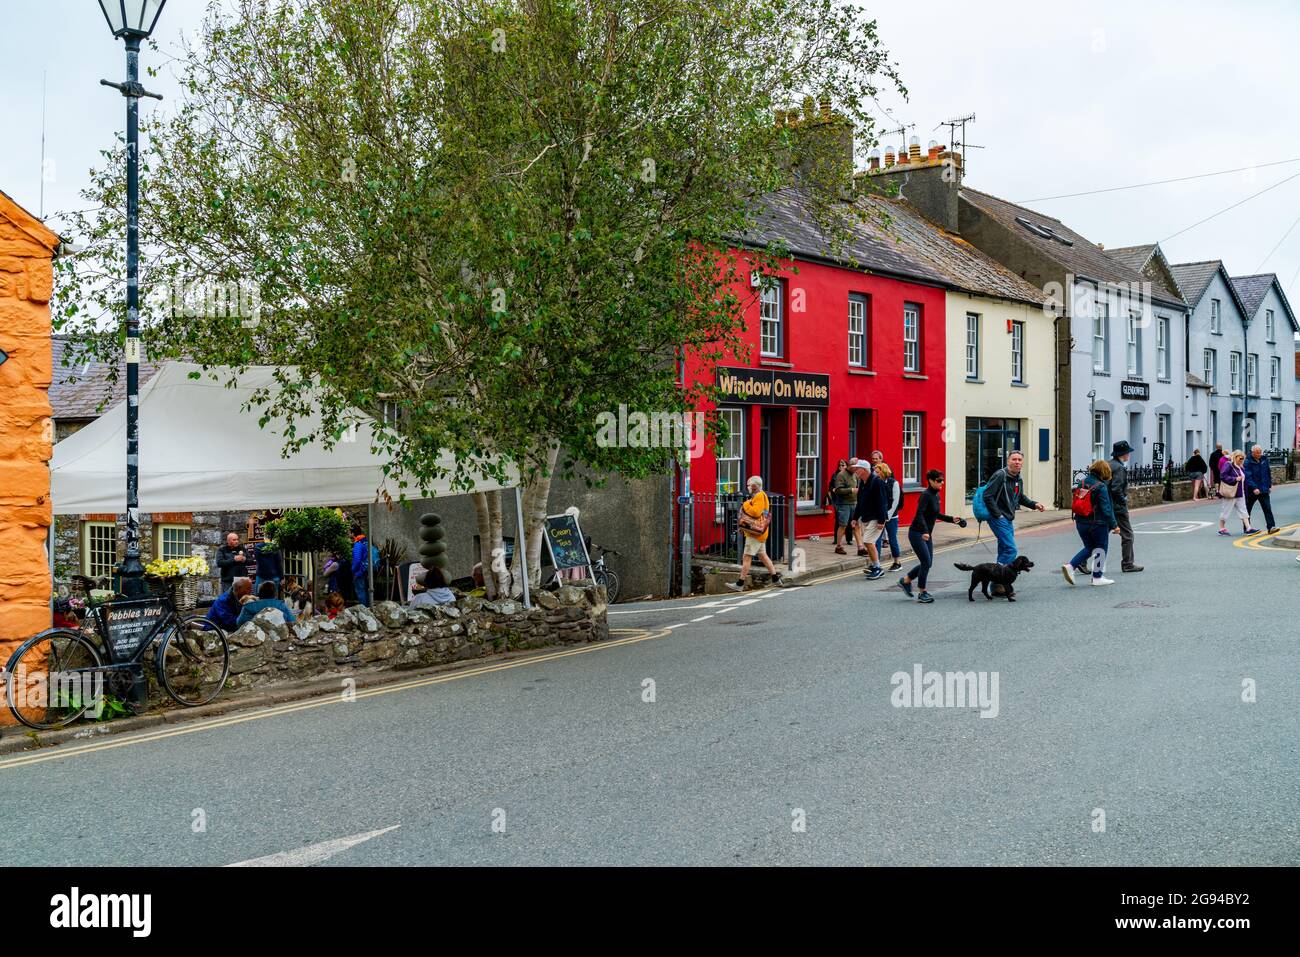 ST DAVIDS, WALES - JUNE 29, 2021: Street view of St Davids, a city in Pembrokeshire, Wales, lying on the River Alun. It is the resting place of Saint Stock Photo